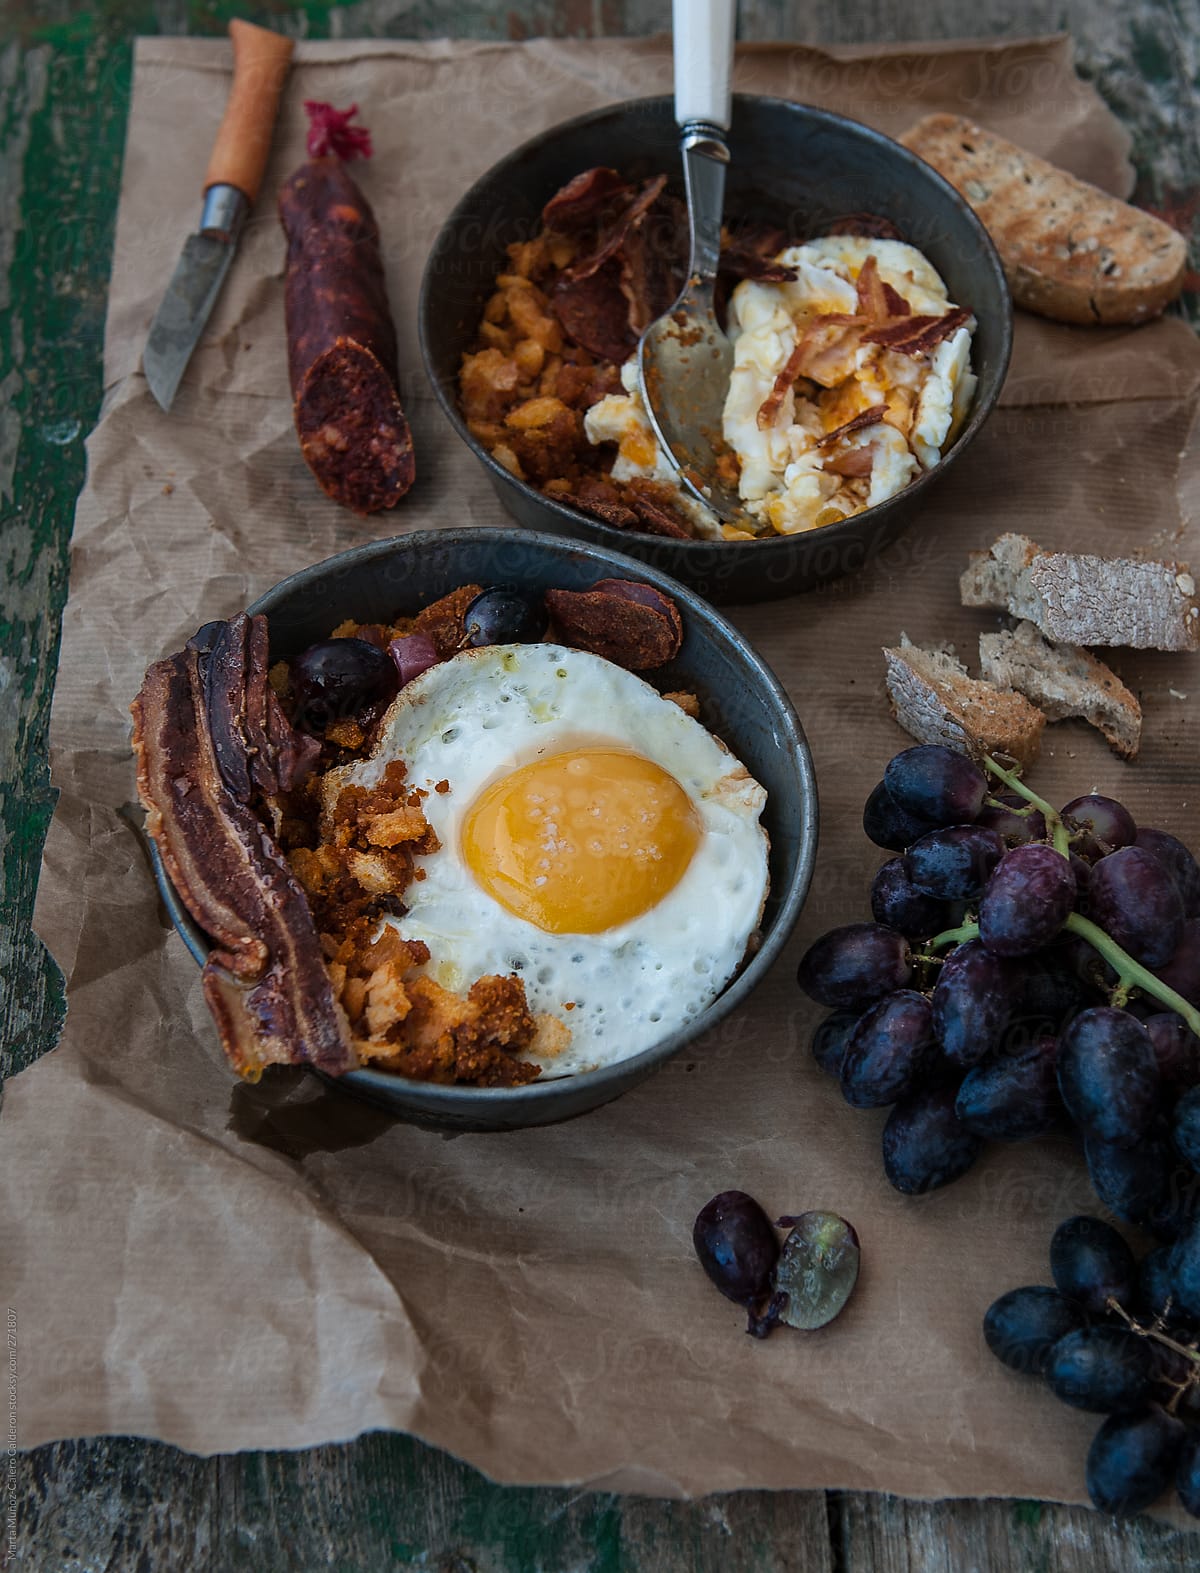 Shepherds Crumbs with eggs and grapes